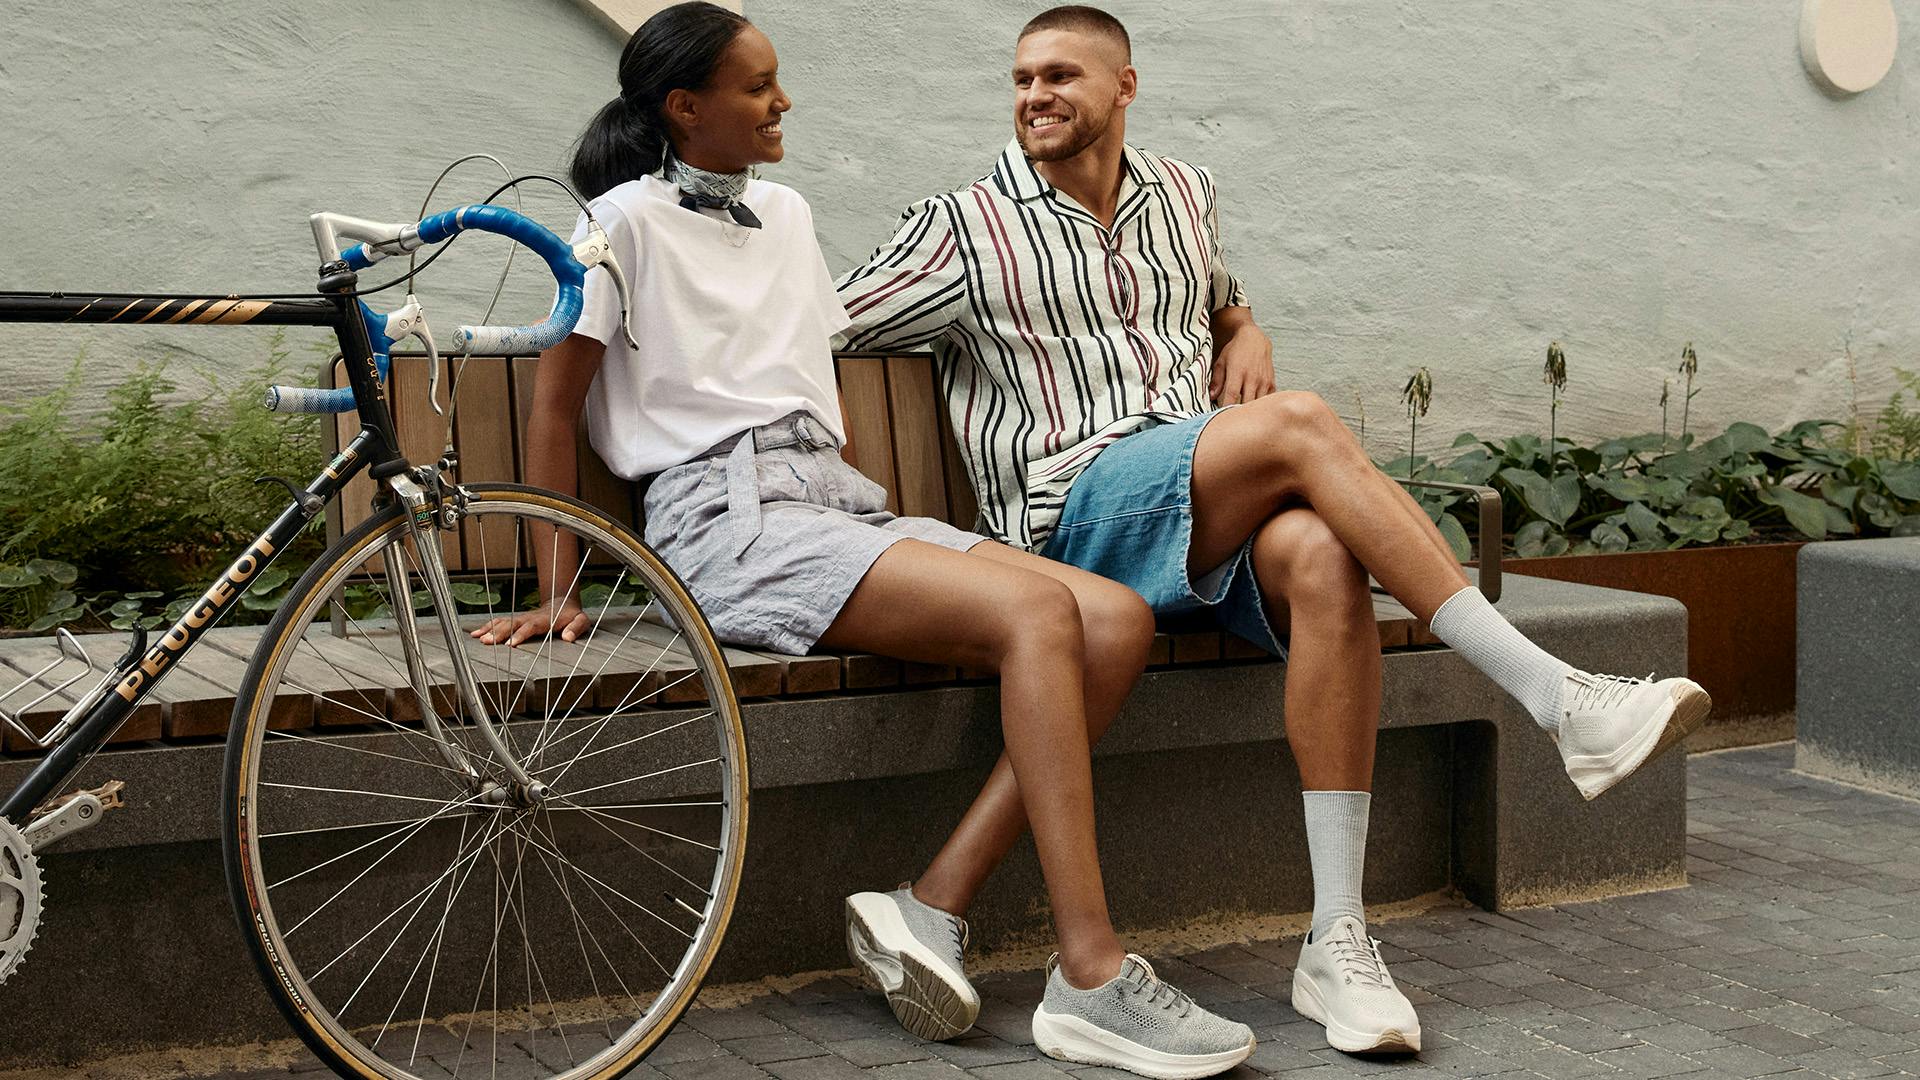 A couple enjoying a peaceful moment on a bench beside a bicycle.